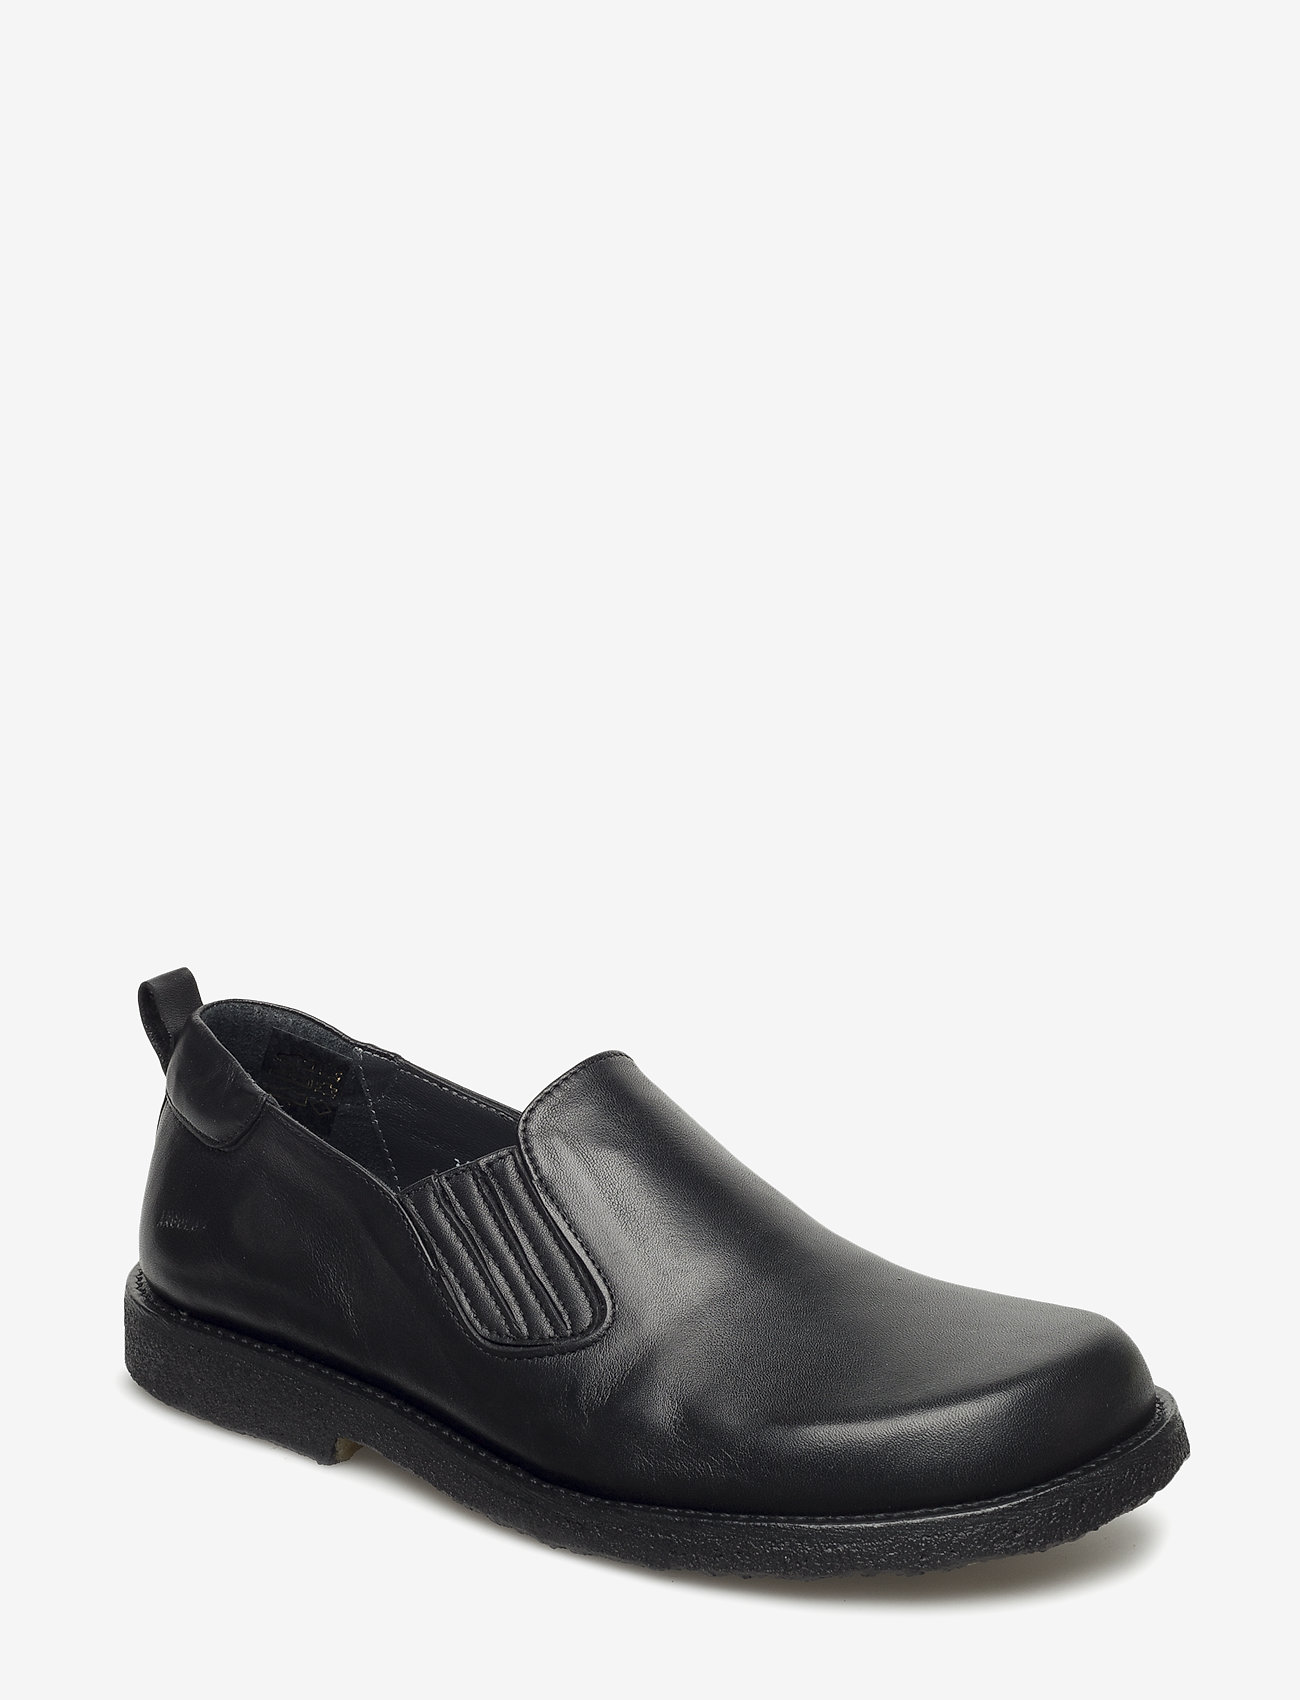 ANGULUS - Shoes - flat - with elastic - loafers - 1604/001 black/black - 0